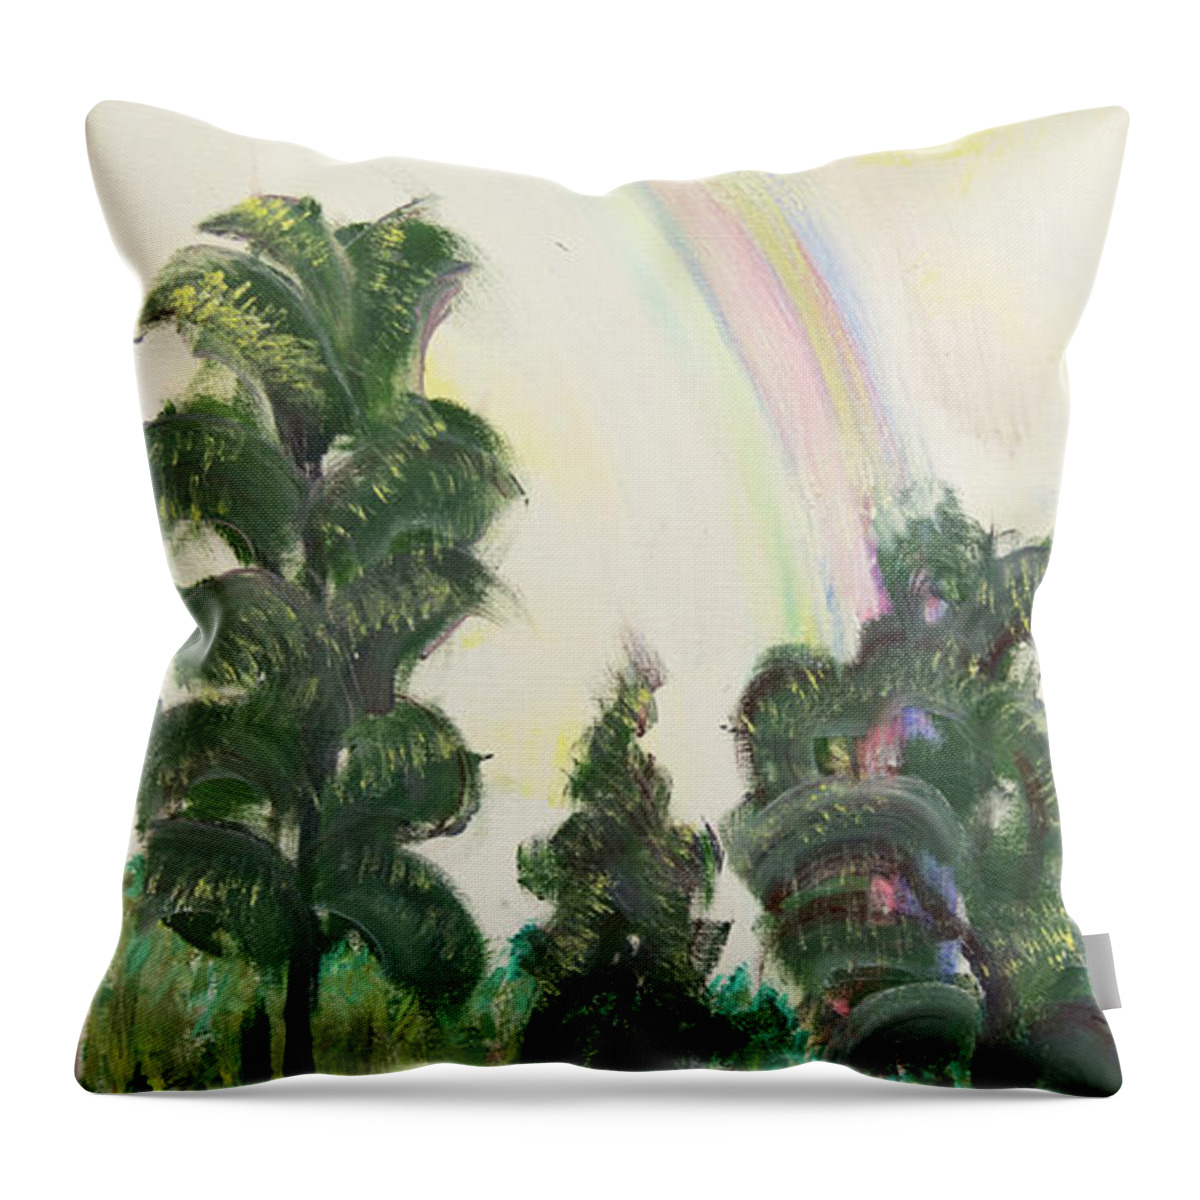  Throw Pillow featuring the painting Forest Rainbow by David McCready